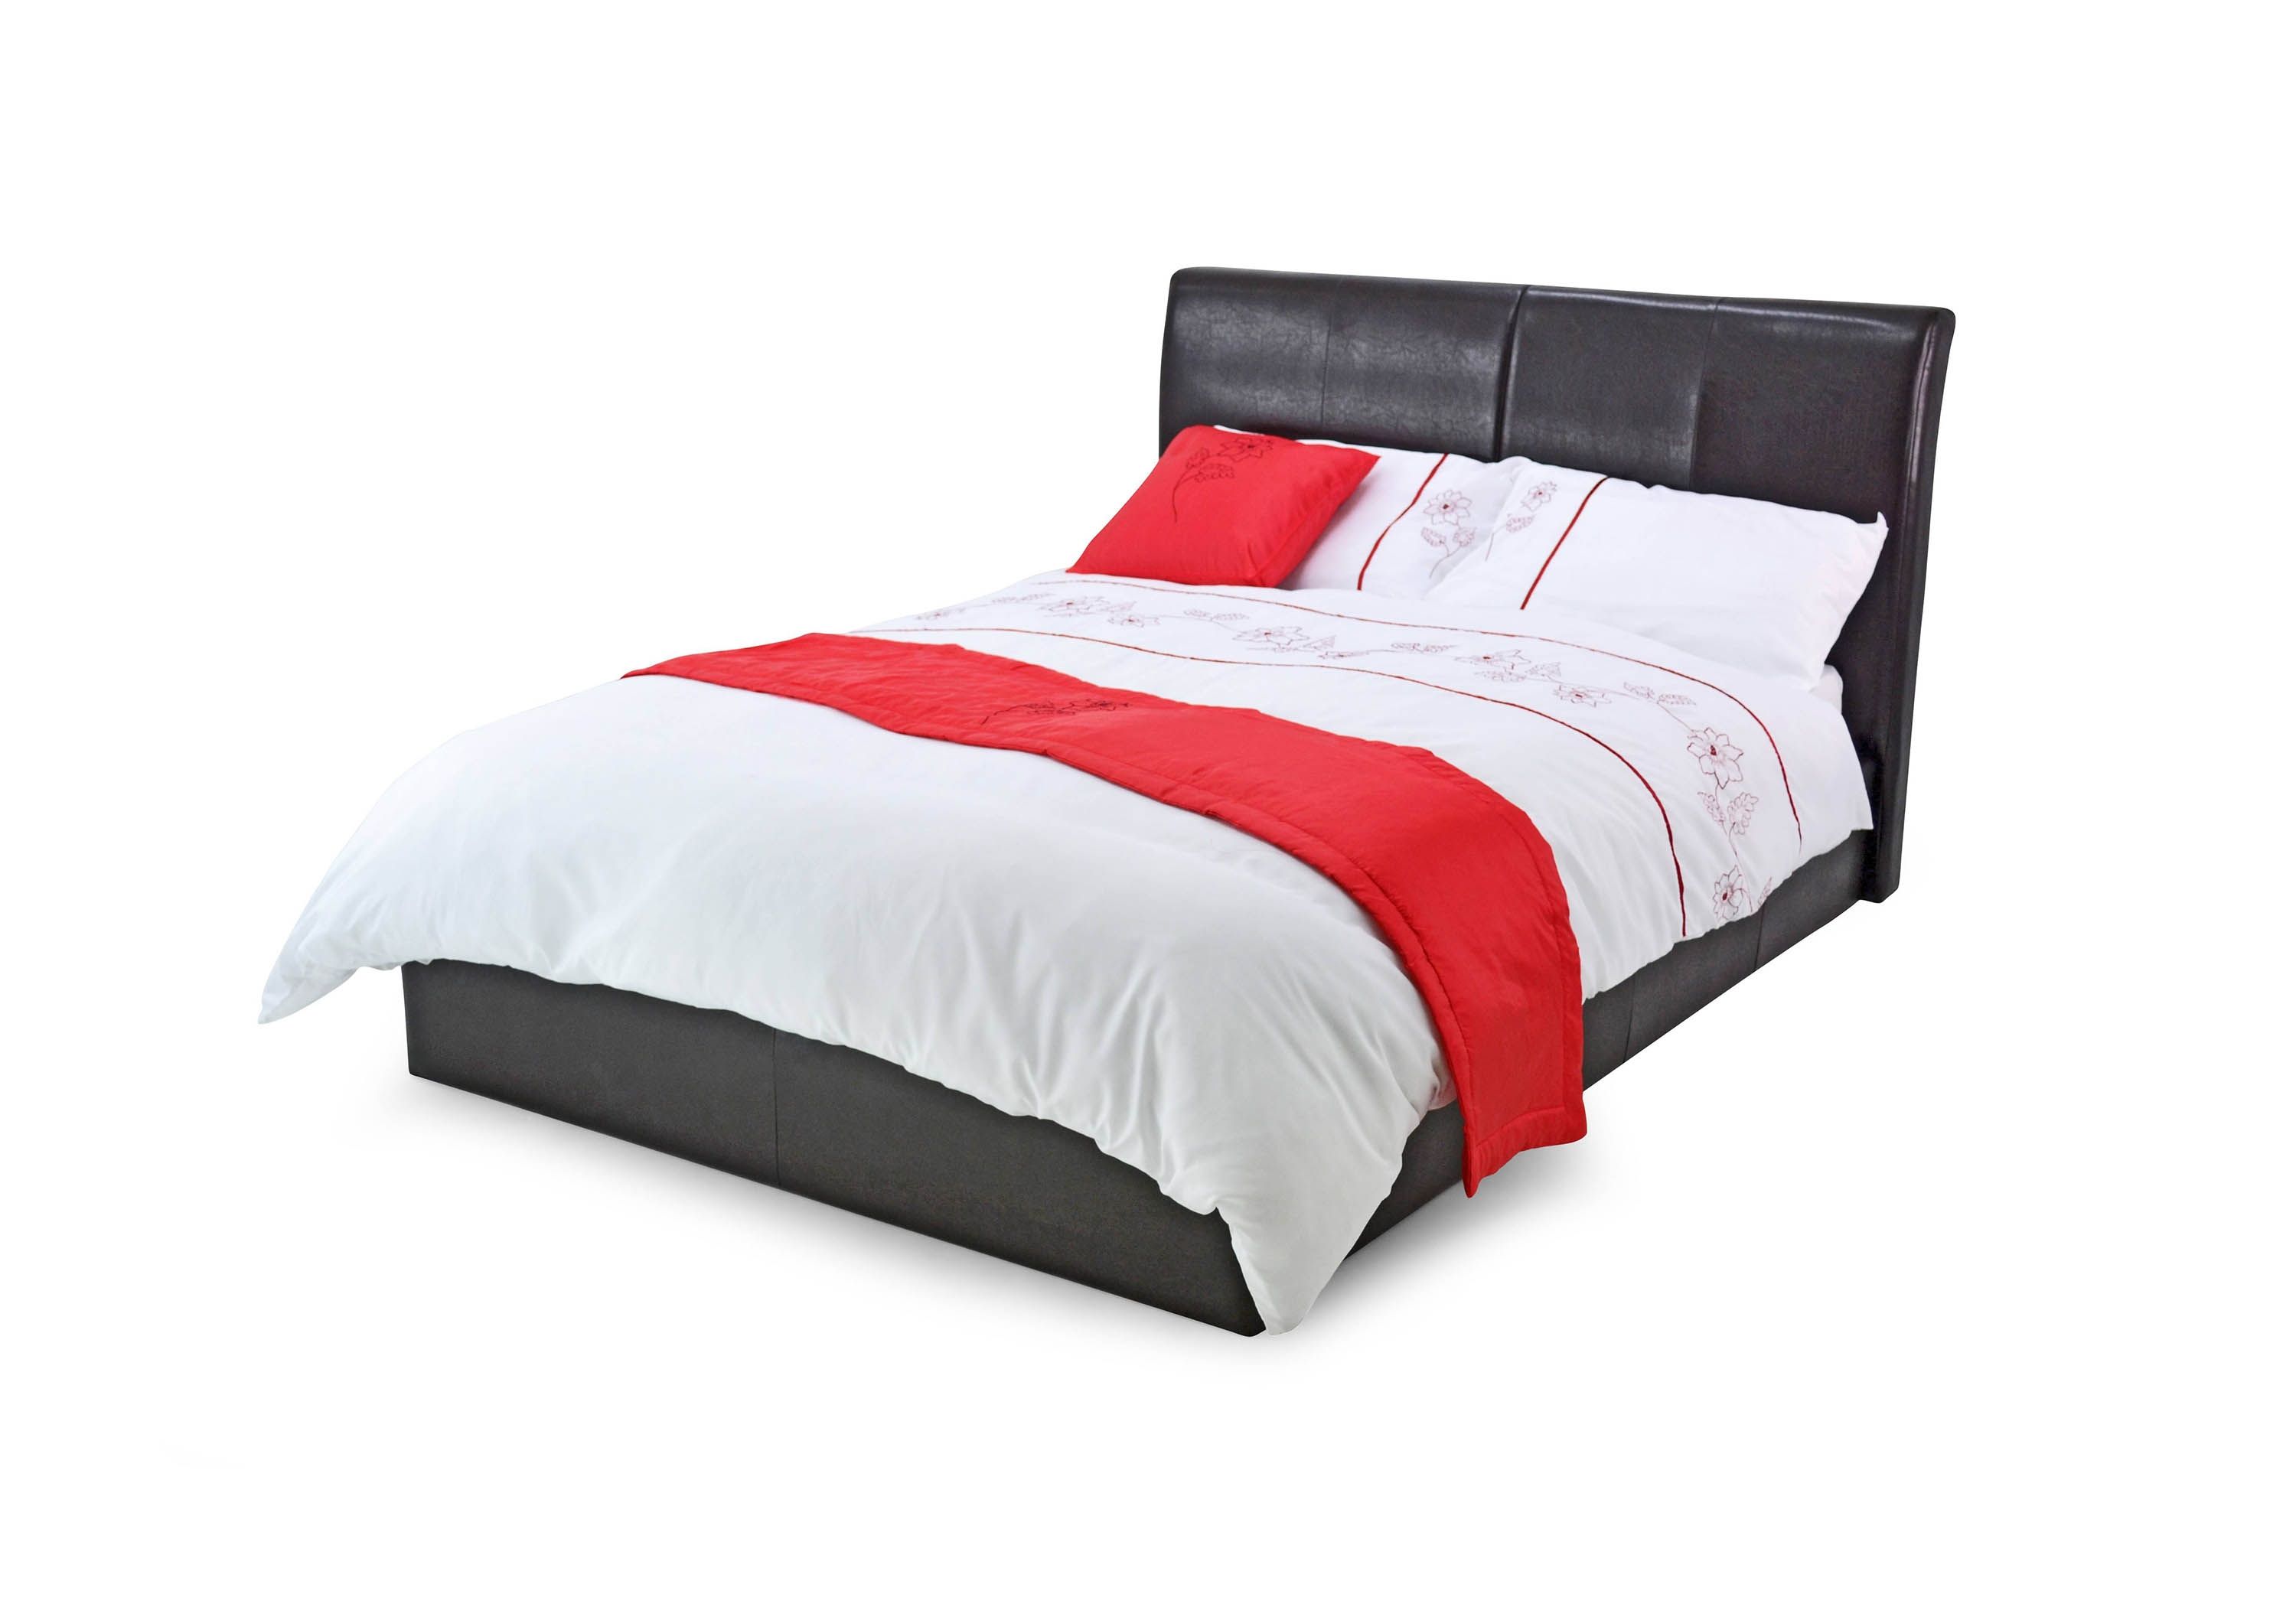 Metal Beds Texas Faux Leather Bed Frame, Red Faux Leather Bed Frame